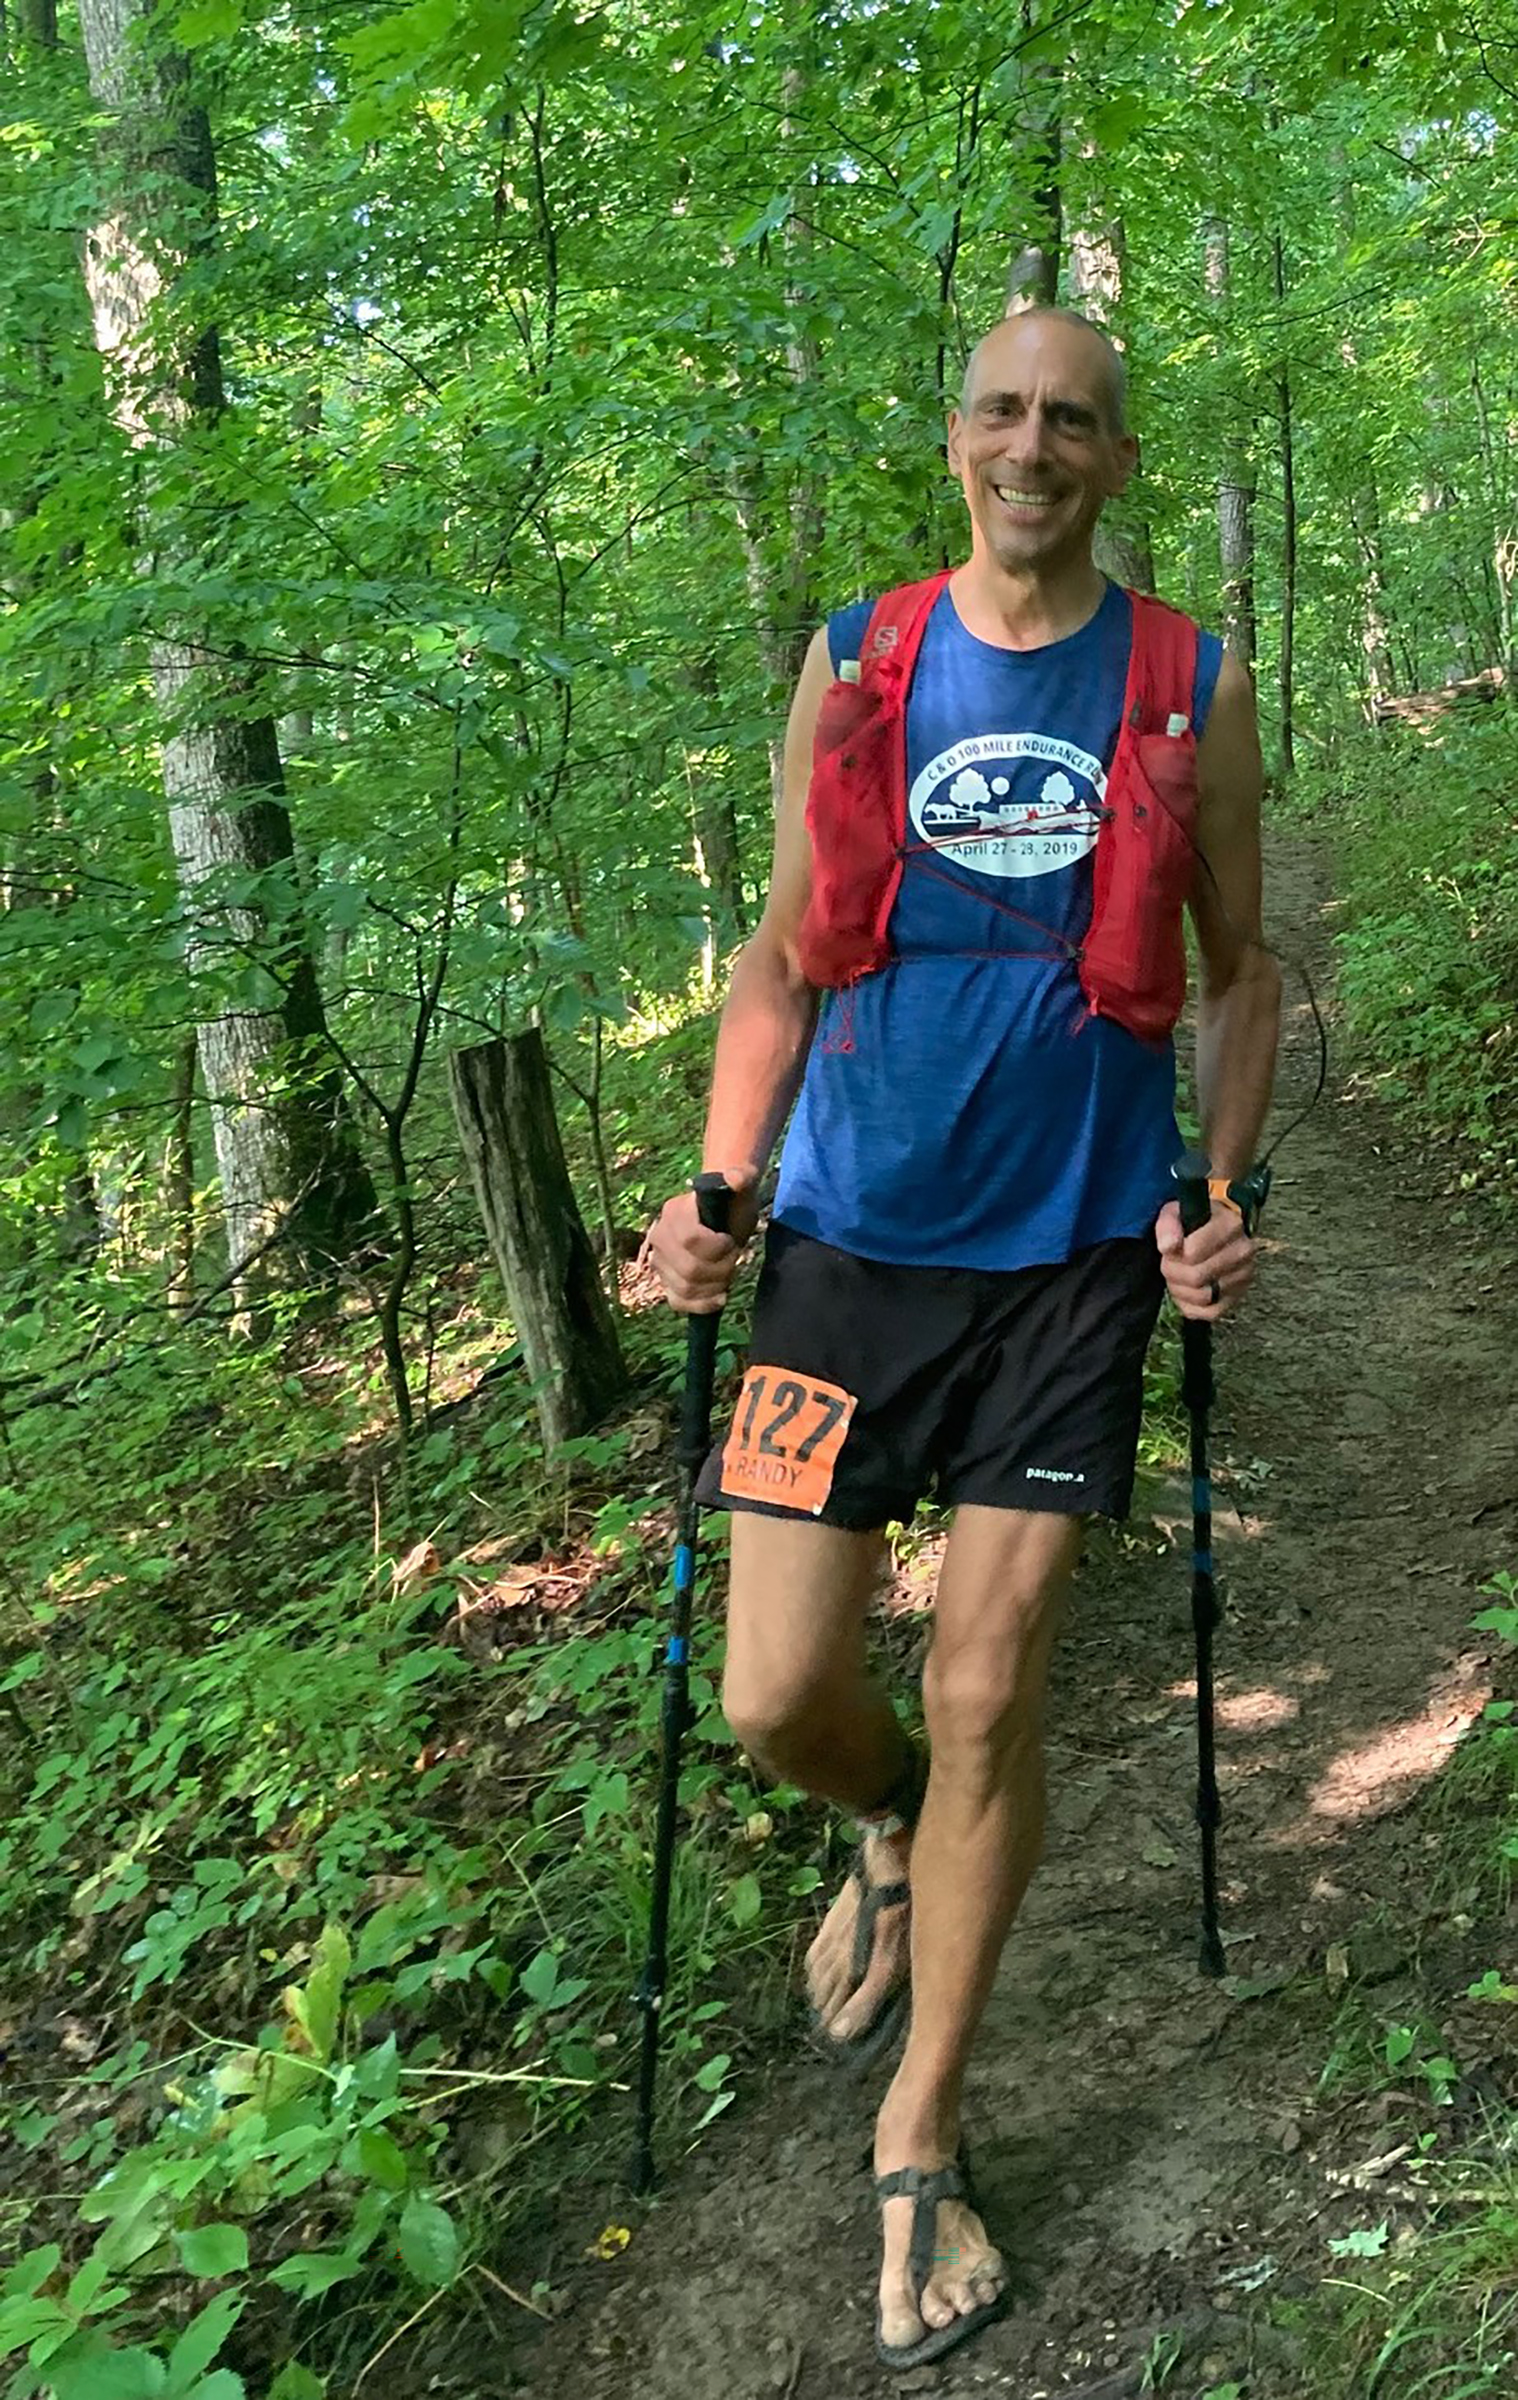 Randy Kreill races regularly and completed his 79th race in July. Most are his 50 to his 100 miles long and he runs these races in sandals only.contributed